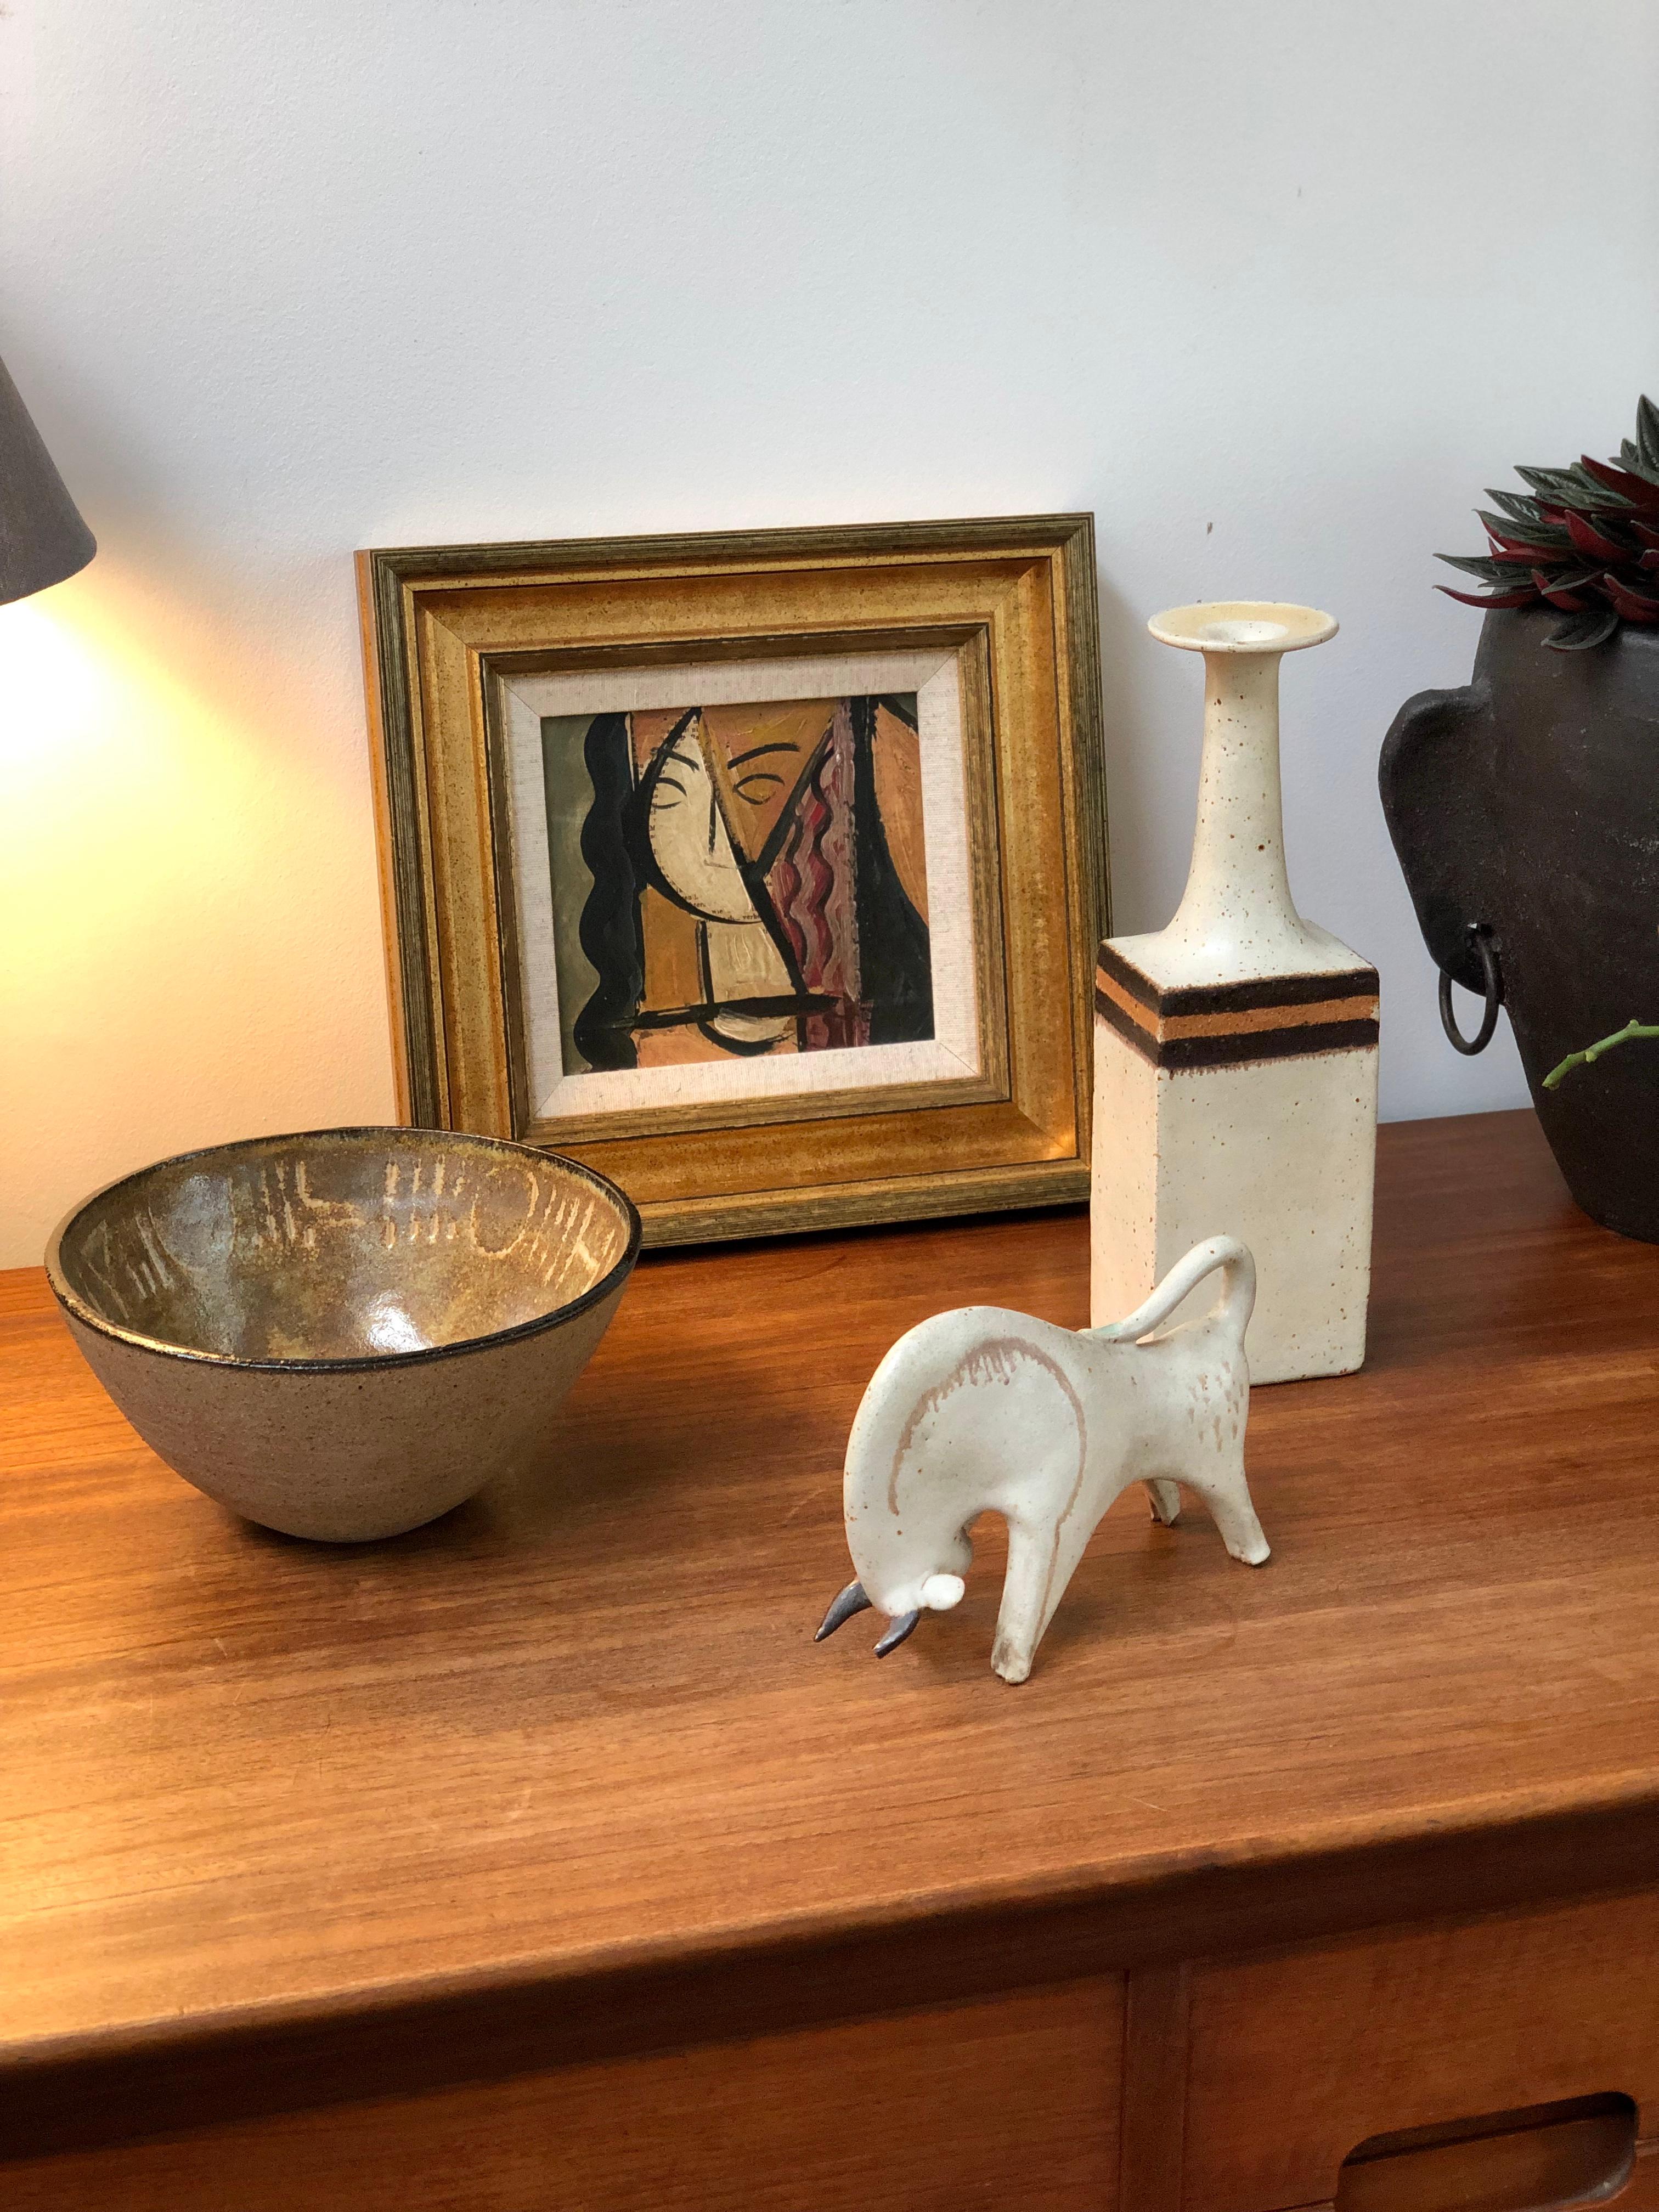 Ceramic decorative bull by Bruno Gambone, circa 1970s. This is a piece from Gambone's series of chalk-white ceramic animal sculptures. A charging bull with brown lines outlining the front torso; one of the lines have drip markings from the painting